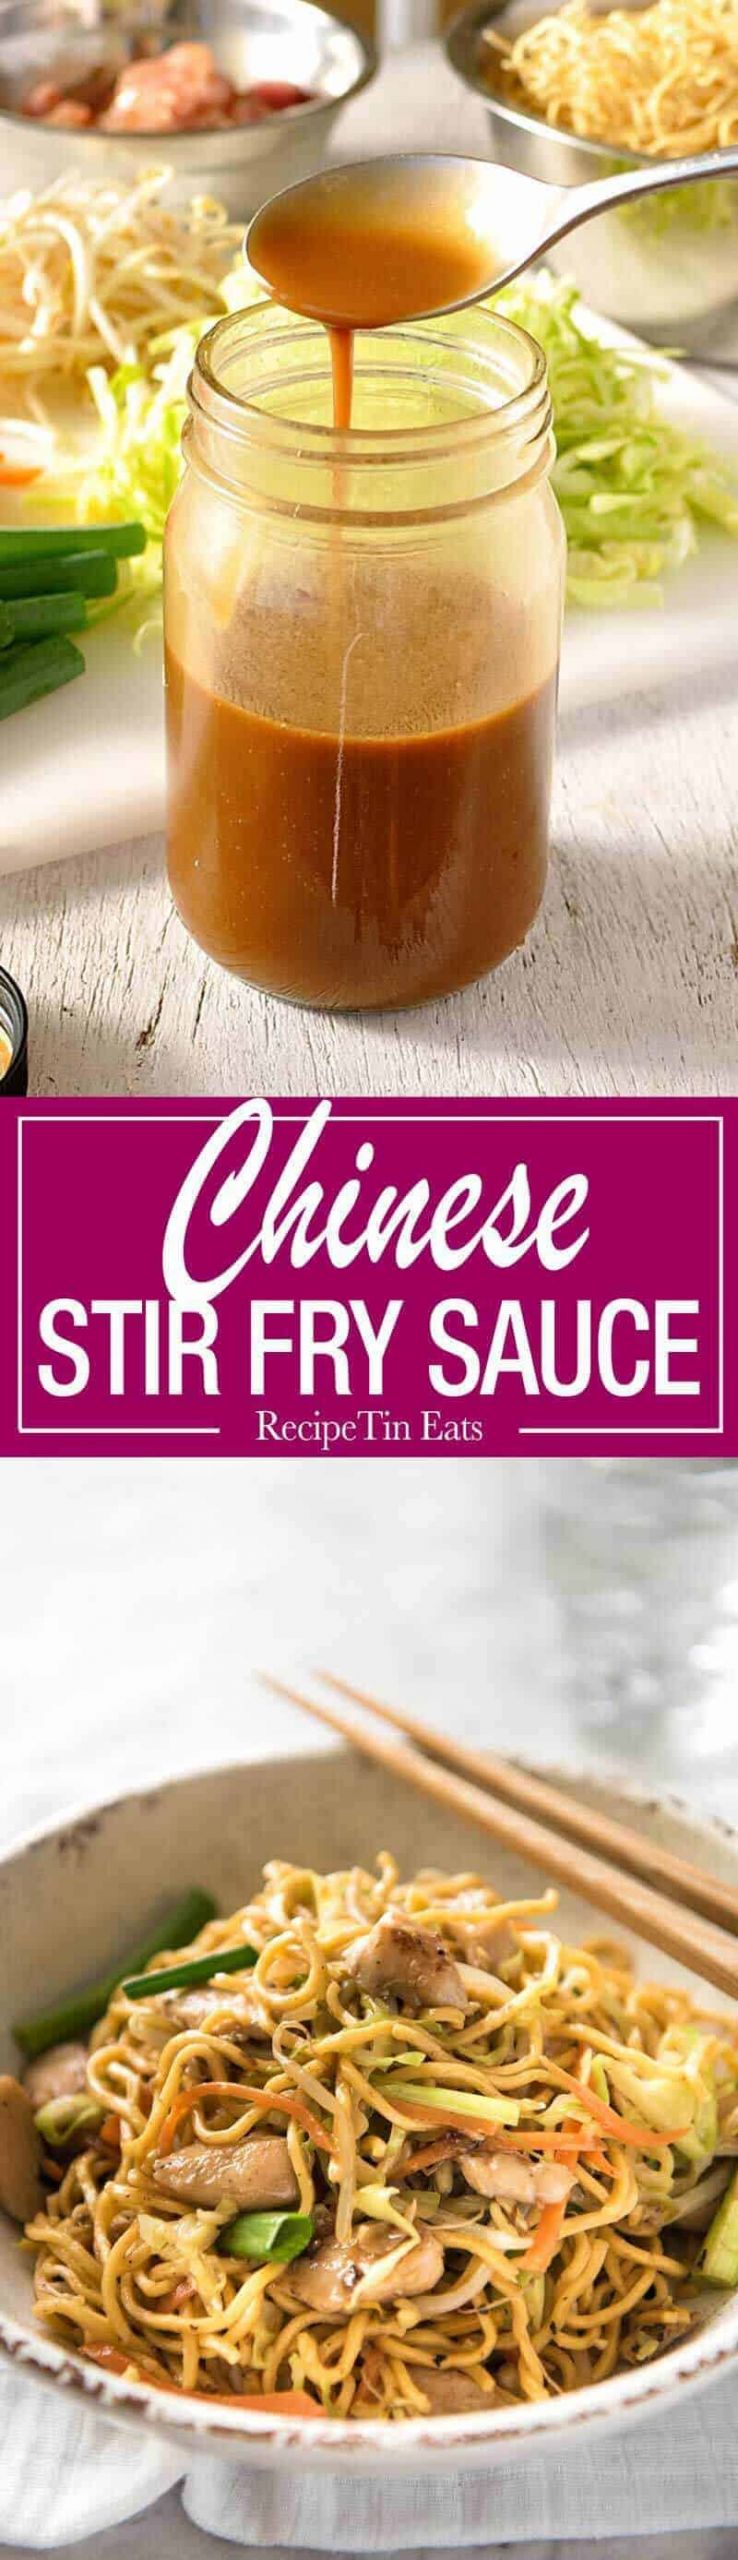 Asian Stir Fry Sauces Recipes
 Real Chinese All Purpose Stir Fry Sauce